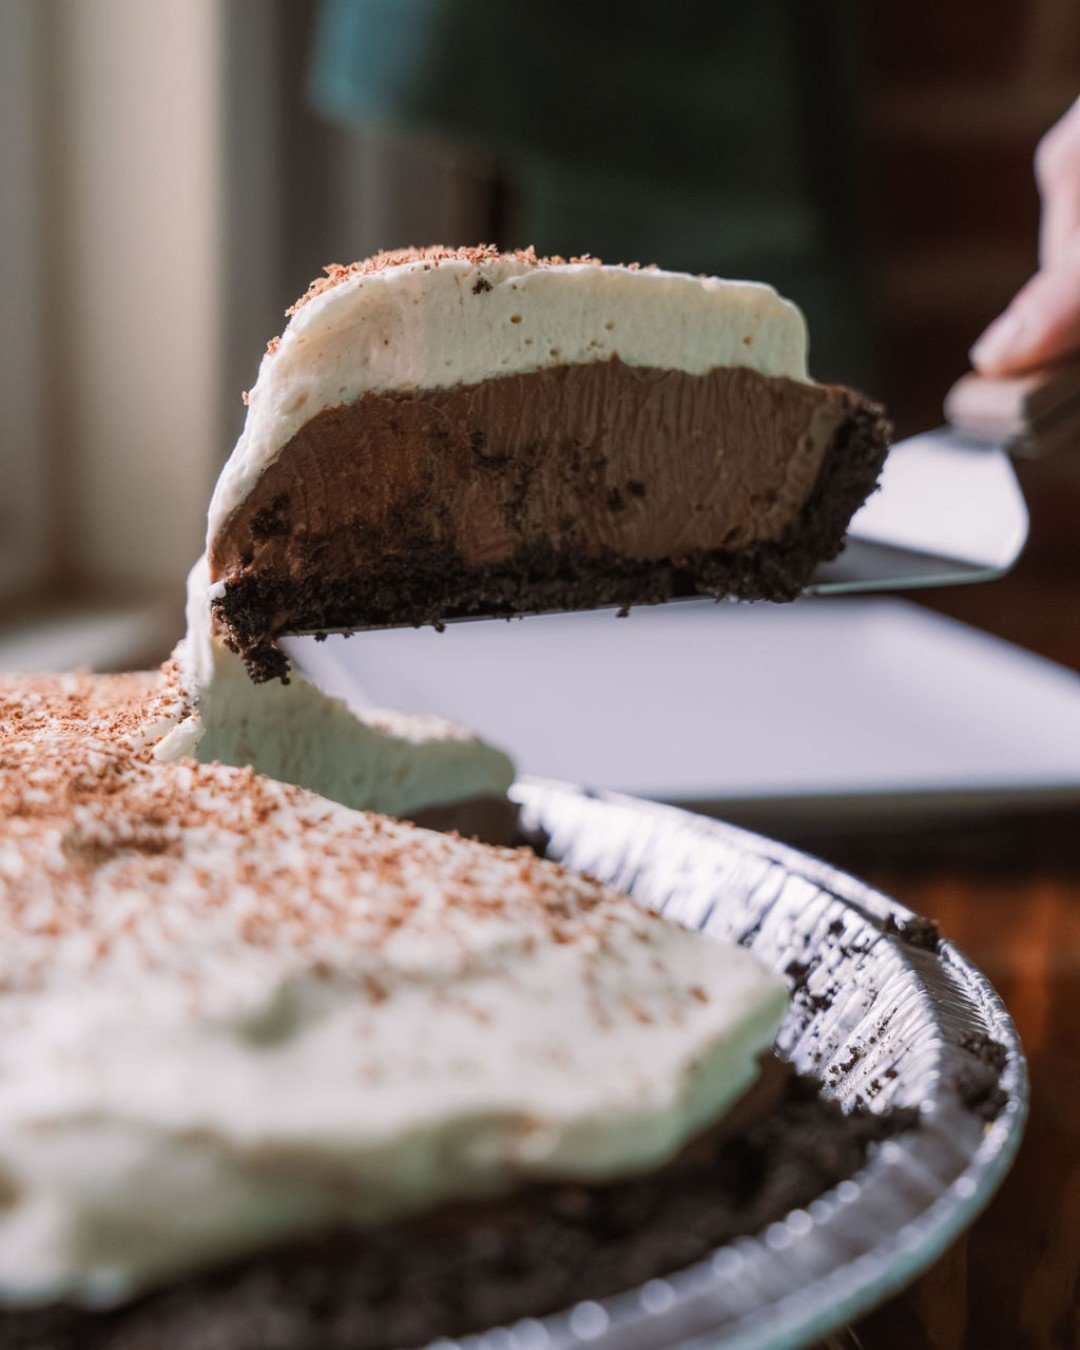 Have you put in your order for May's Pie of the Month? Chocolate lovers - this one's for you! May's pie of the month is our Chocolate Cream Pie! This decadent pie has an Oreo crust, a rich dark chocolate cream filling, whipped cream top, and is finis